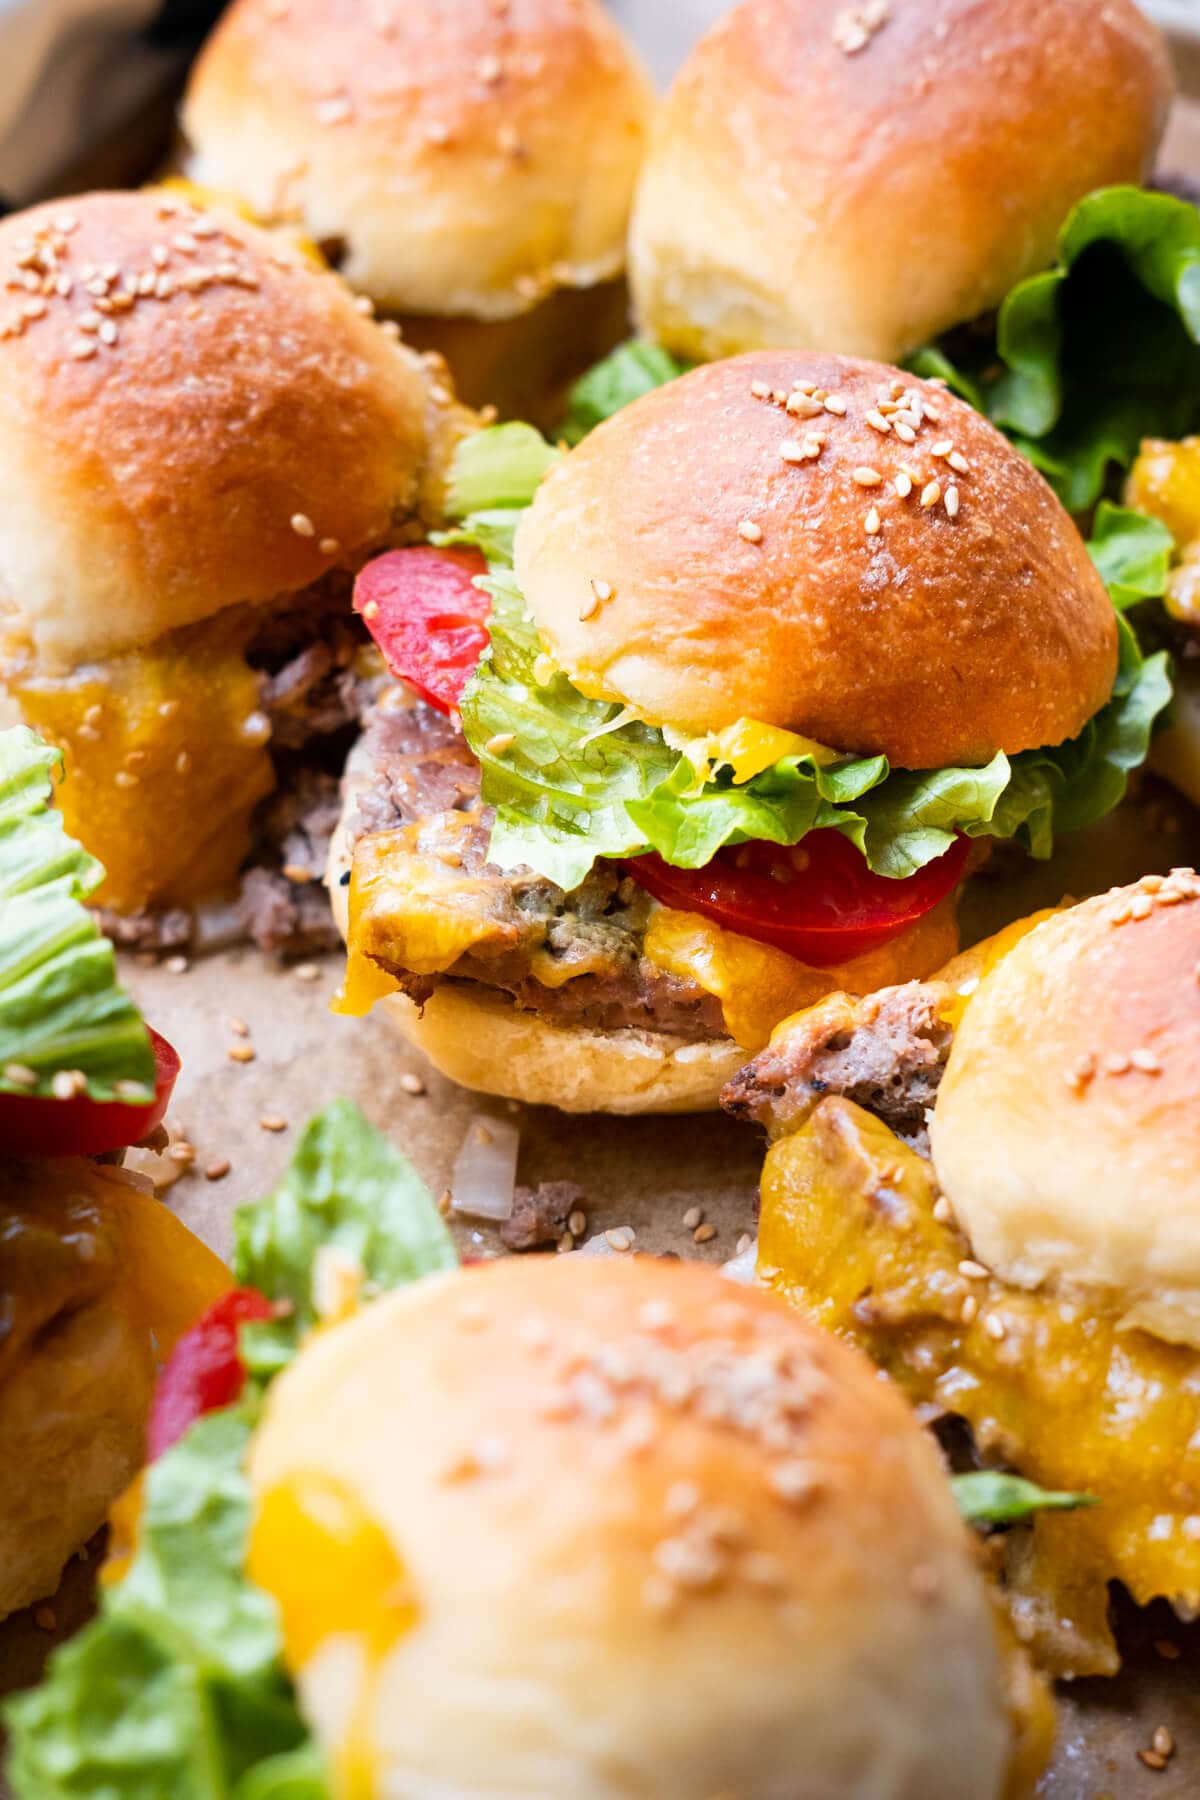 Mini cheeseburger sliders with lettuce and tomato slices.